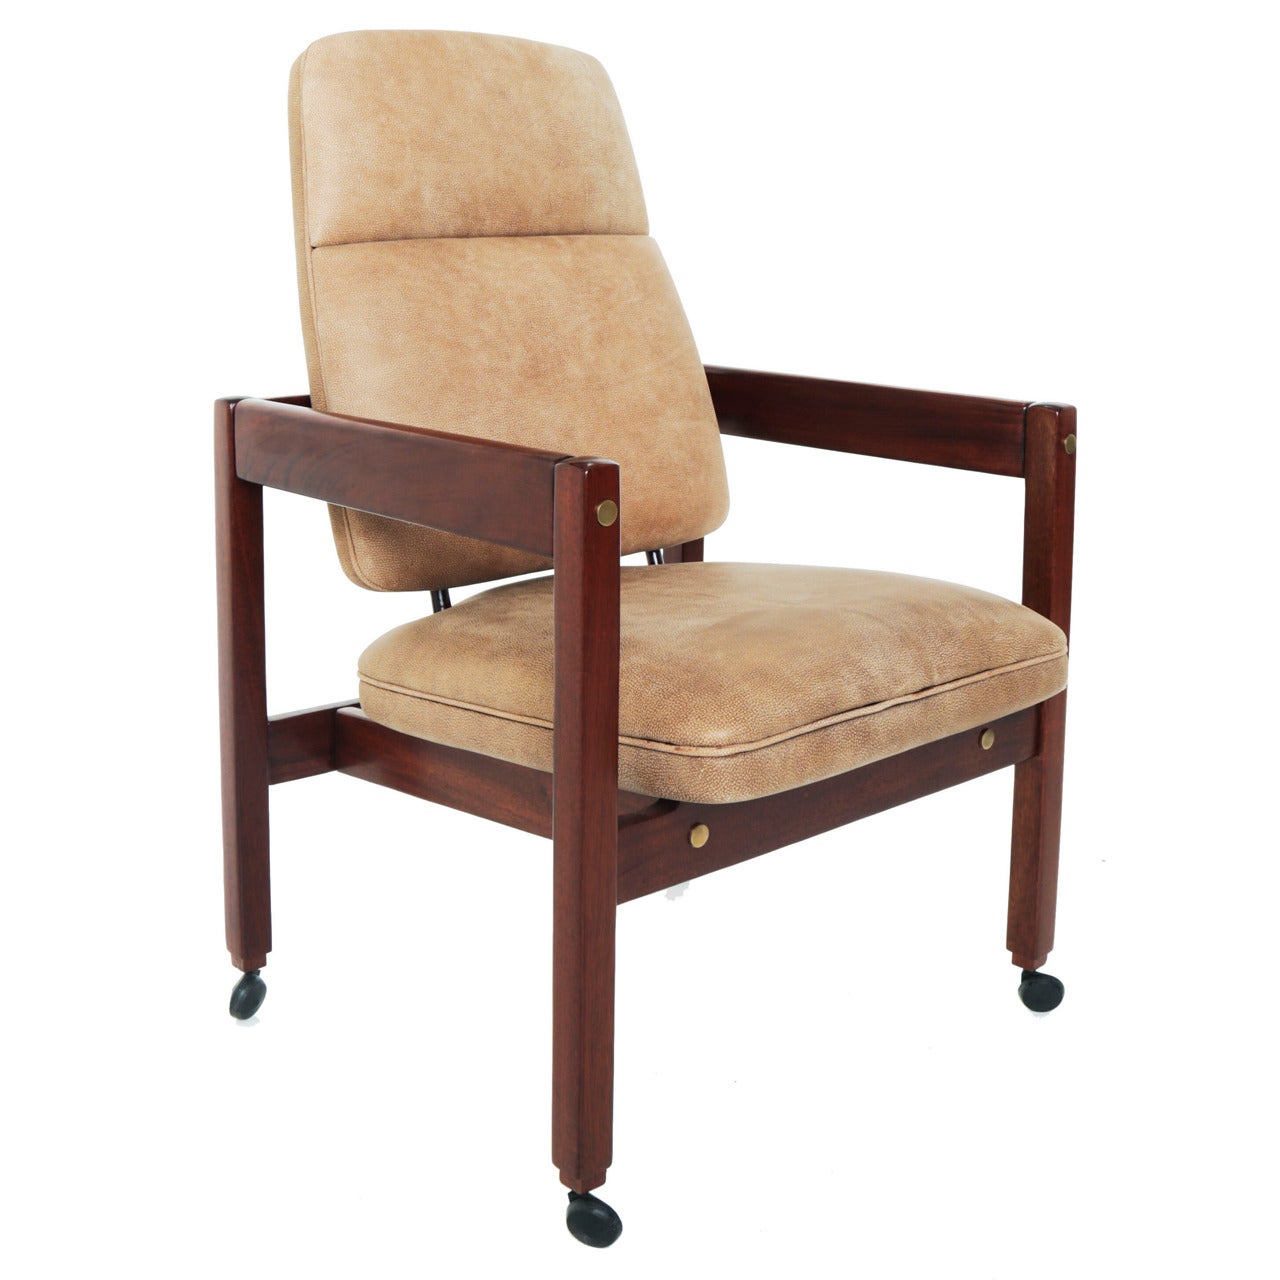 High-Back "Kiko" Armchair Desk Chair by Sergio Rodrigues For Sale